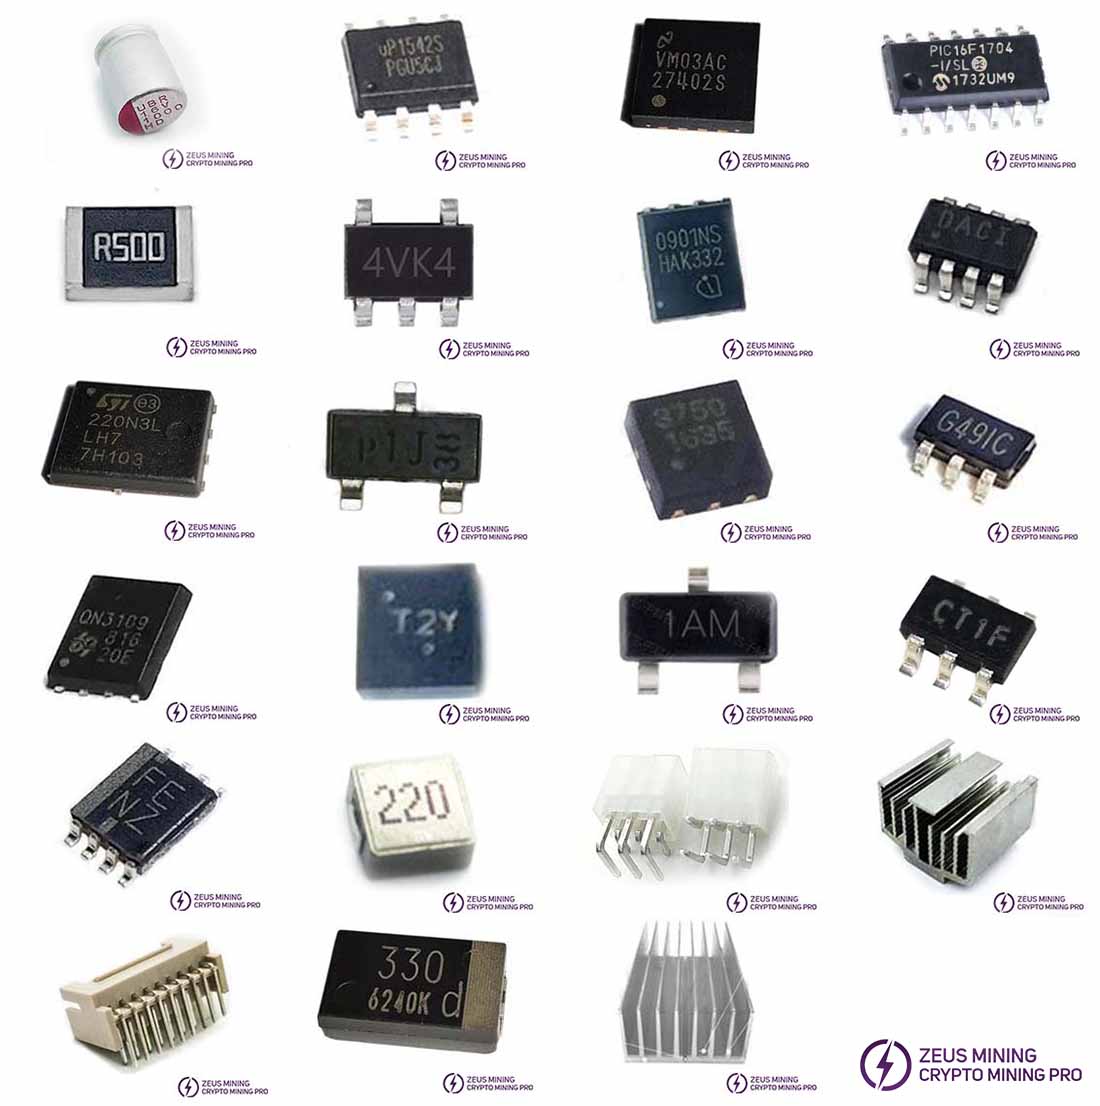 S9 hash board replacement parts